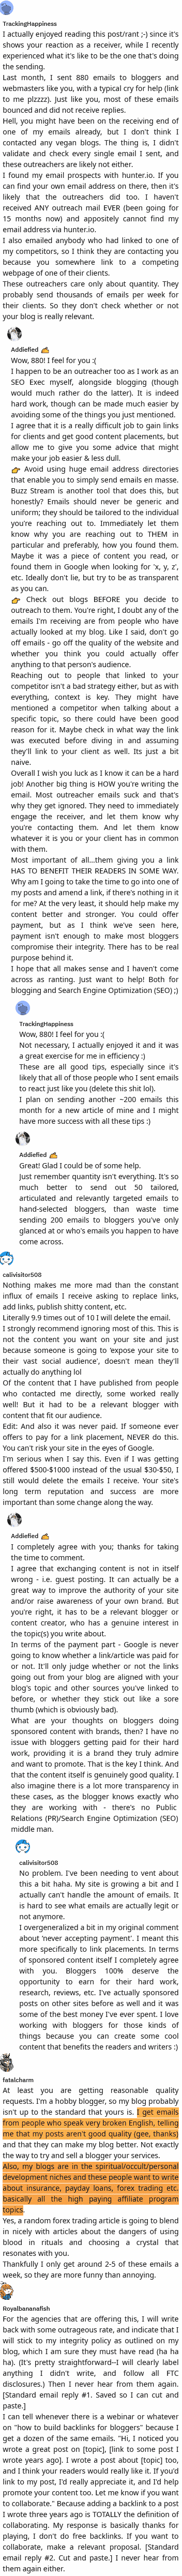 i often get emails from seo agencies or pr or outreachers to publish their content on my blog or website